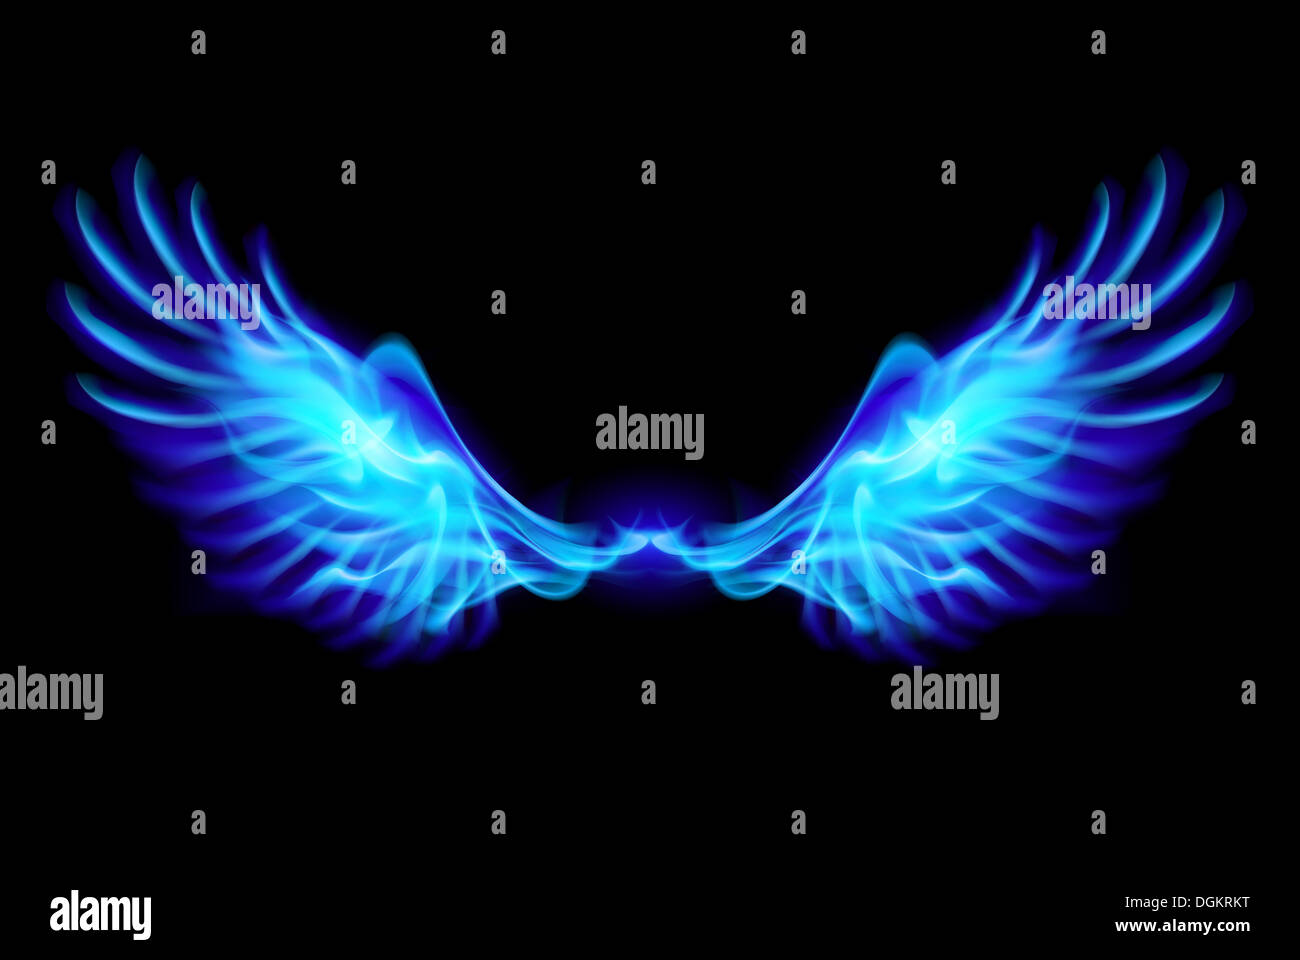 Illustration of blue fire wings on balck background Stock Photo - Alamy